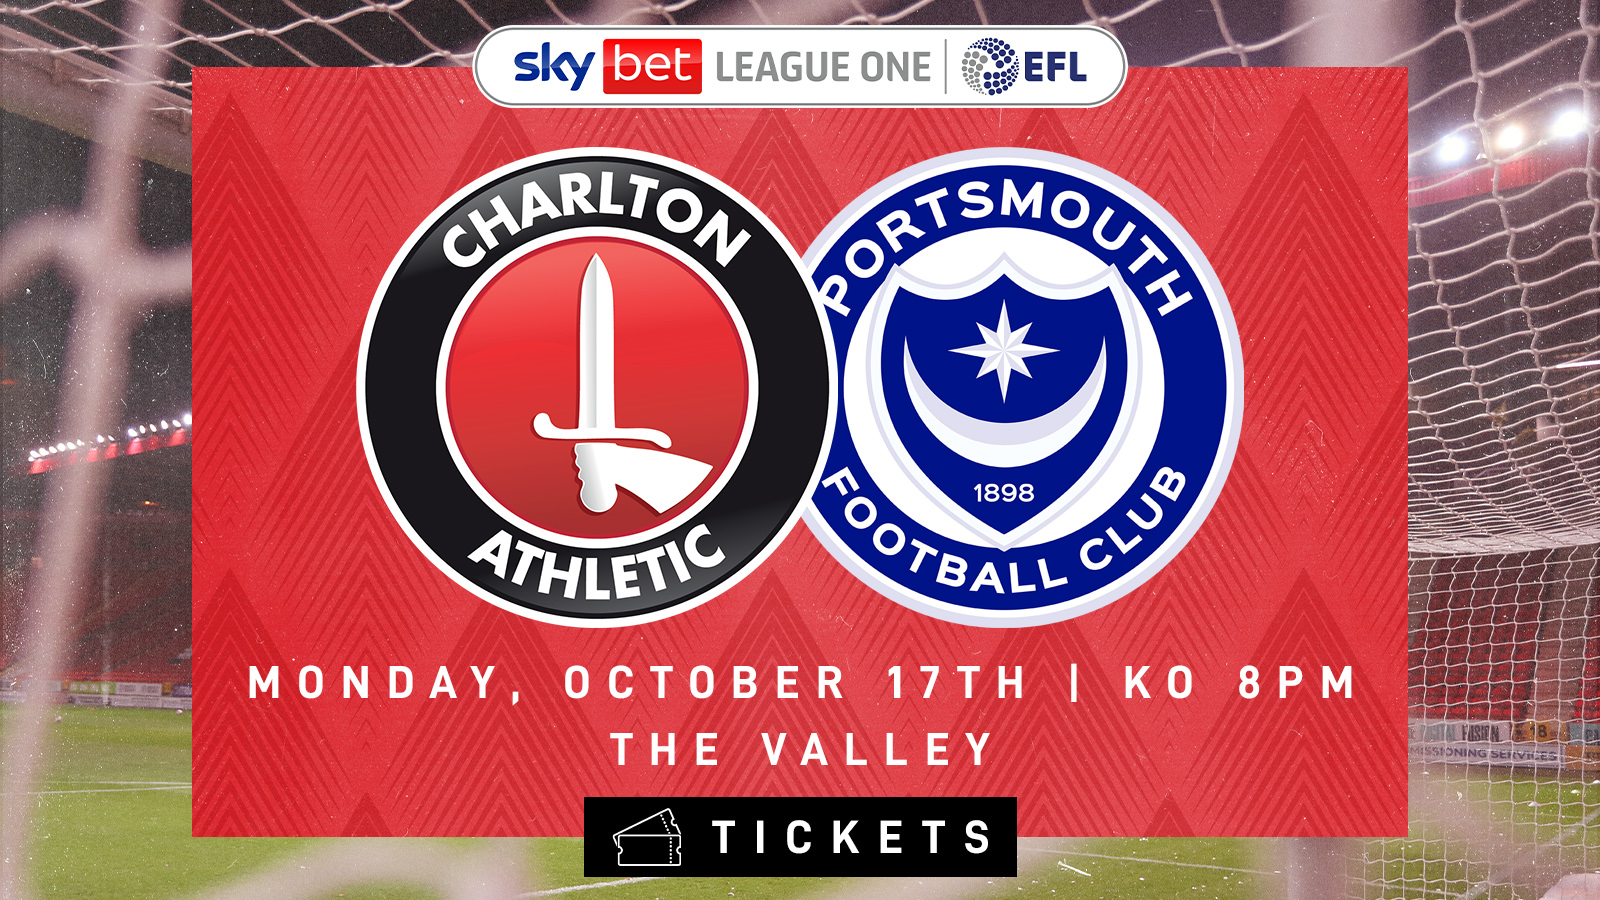 Get your tickets for Monday's game against Portsmouth